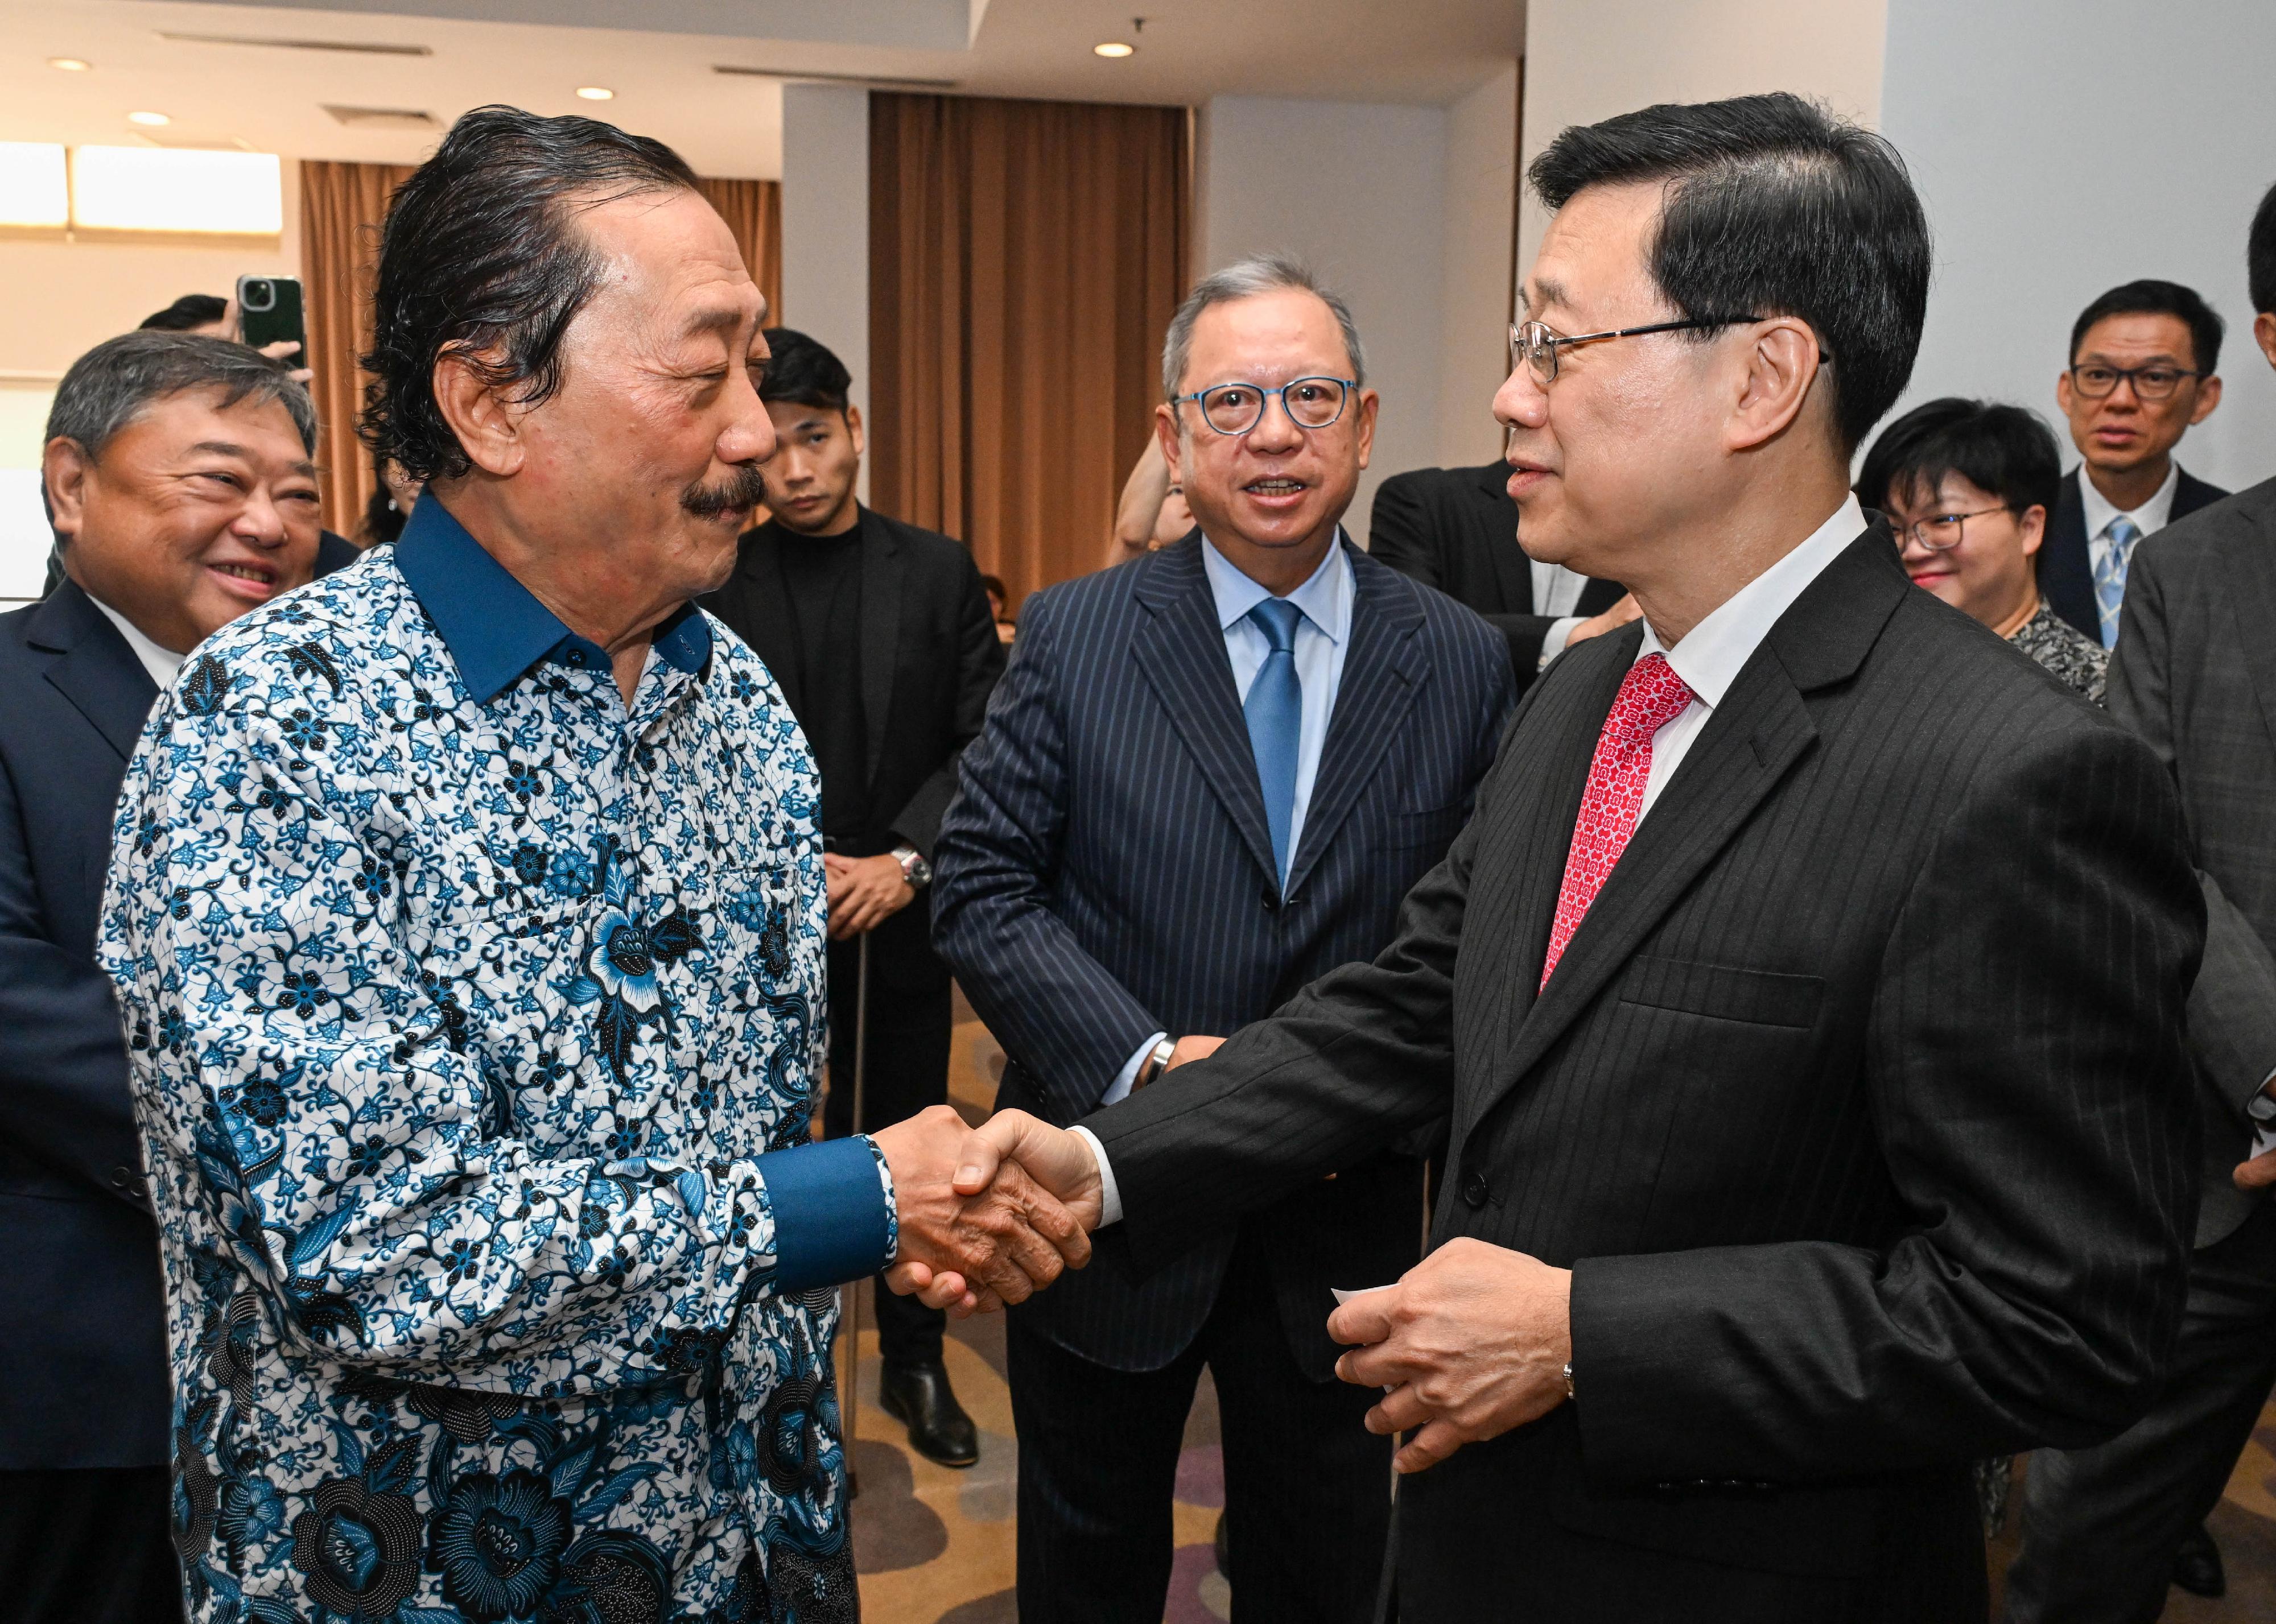 The Chief Executive, Mr John Lee, and a Hong Kong Special Administrative Region delegation visited Berjaya Corporation Berhad in Kuala Lumpur, Malaysia today (July 28). Photo shows Mr Lee (right) being greeted by the Founder of Berjaya Corporation Berhad, Mr Vincent Tan (left).